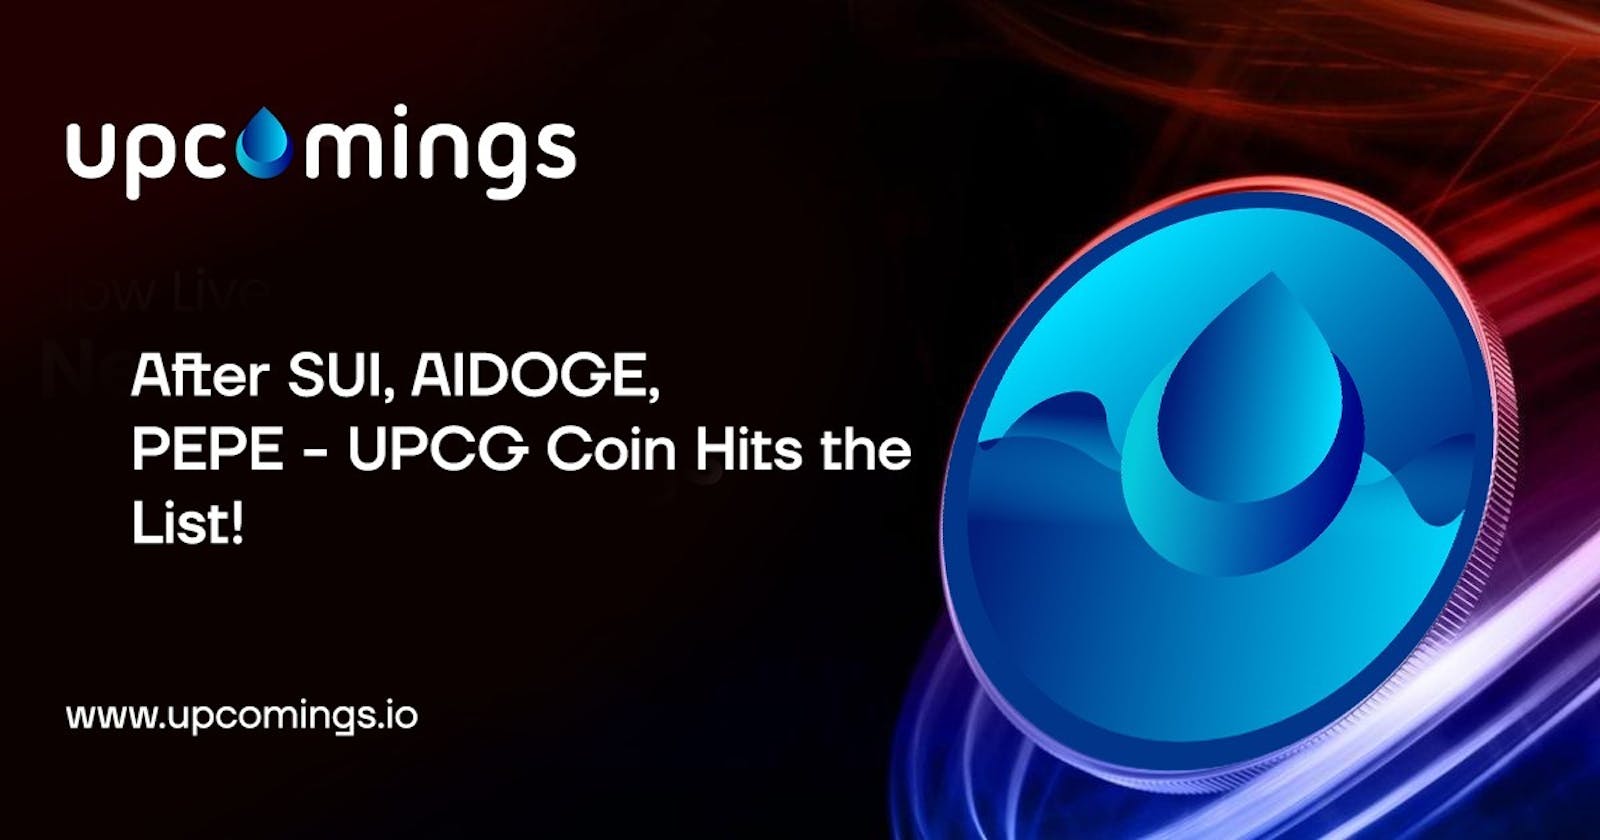 After SUI, AIDOGE, PEPE — UPCG Coin Hits the List!